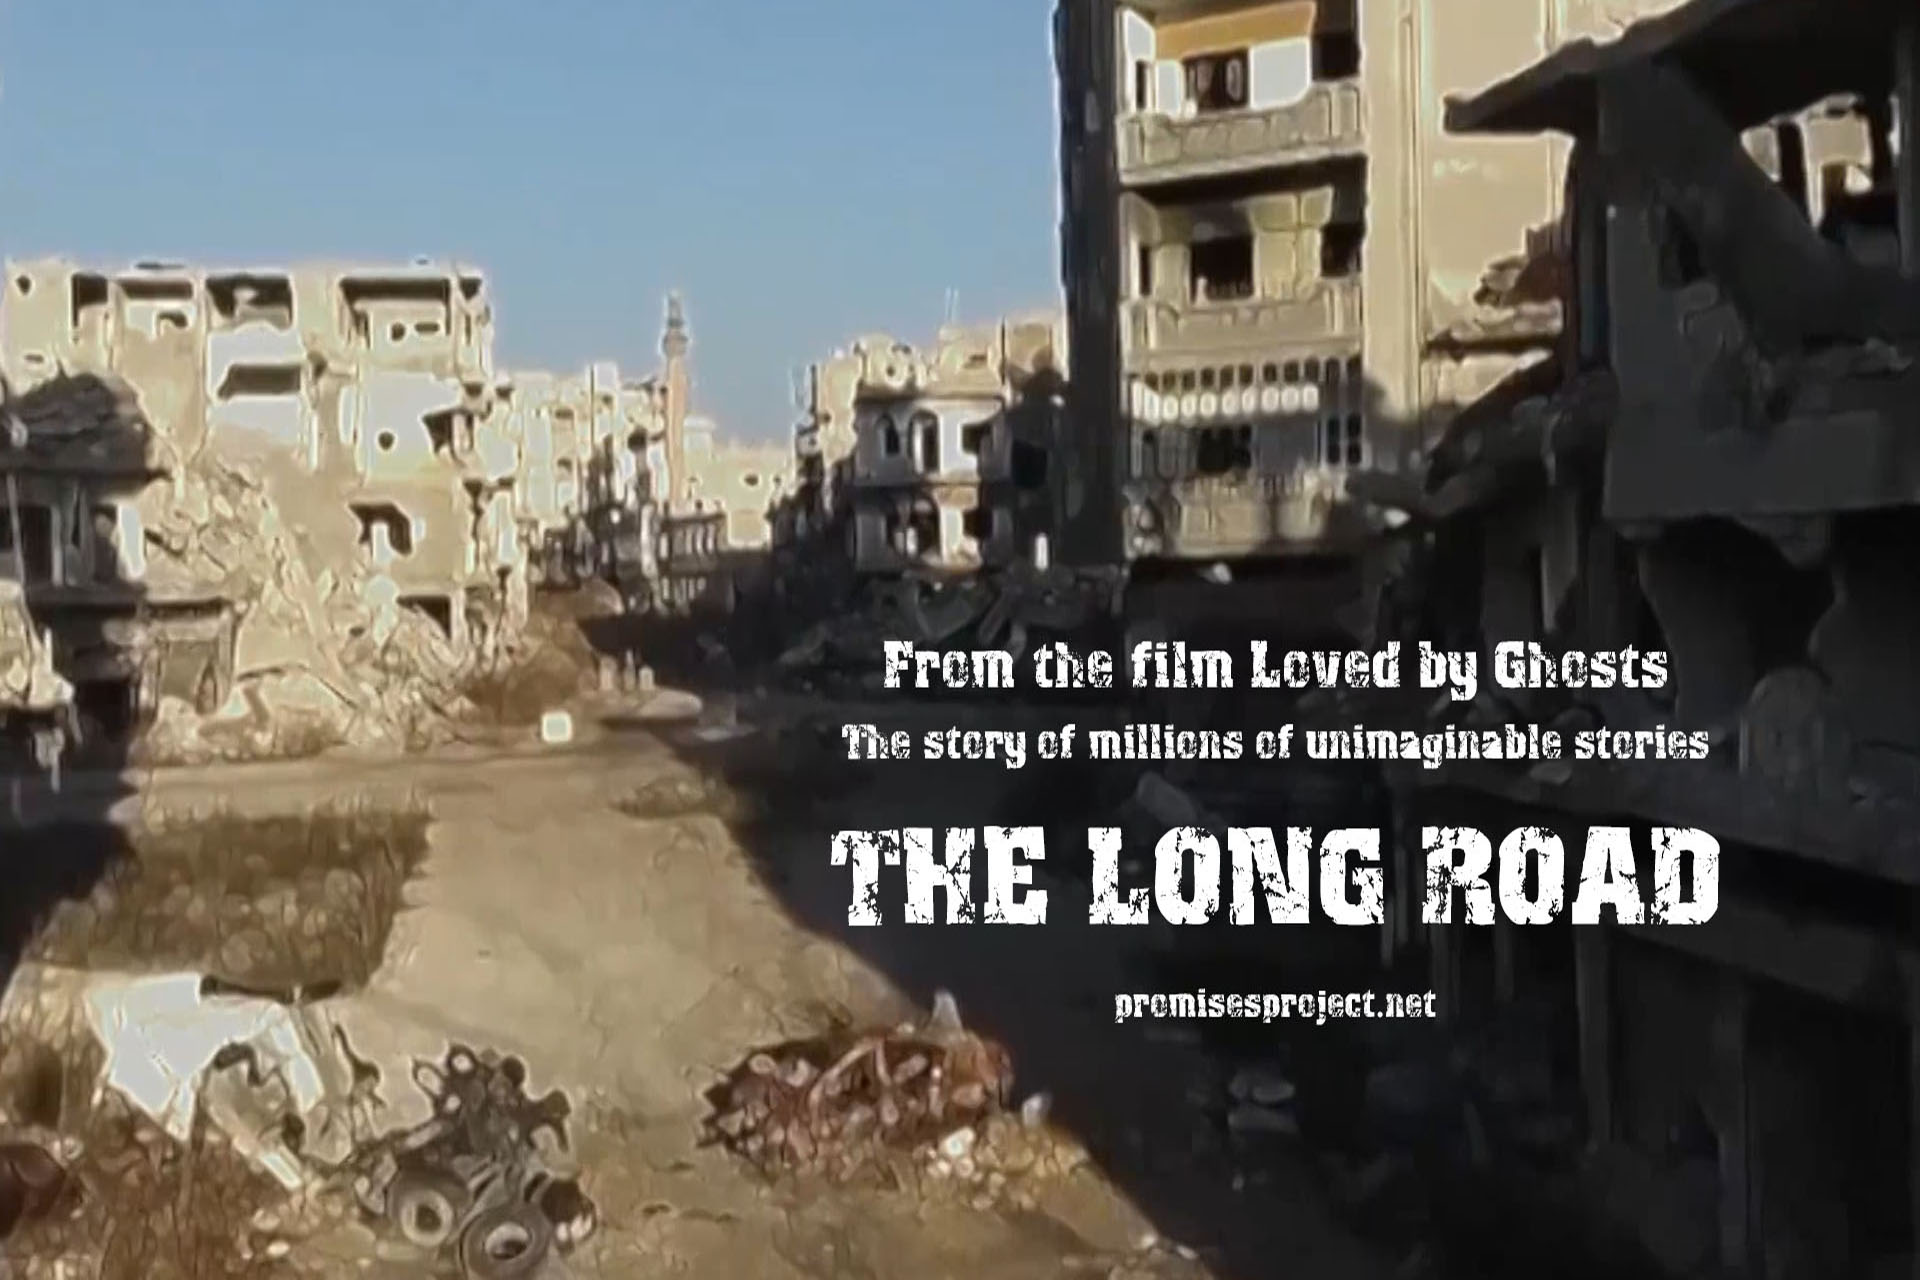 The Long Road - from the film 'Loved by Ghosts'